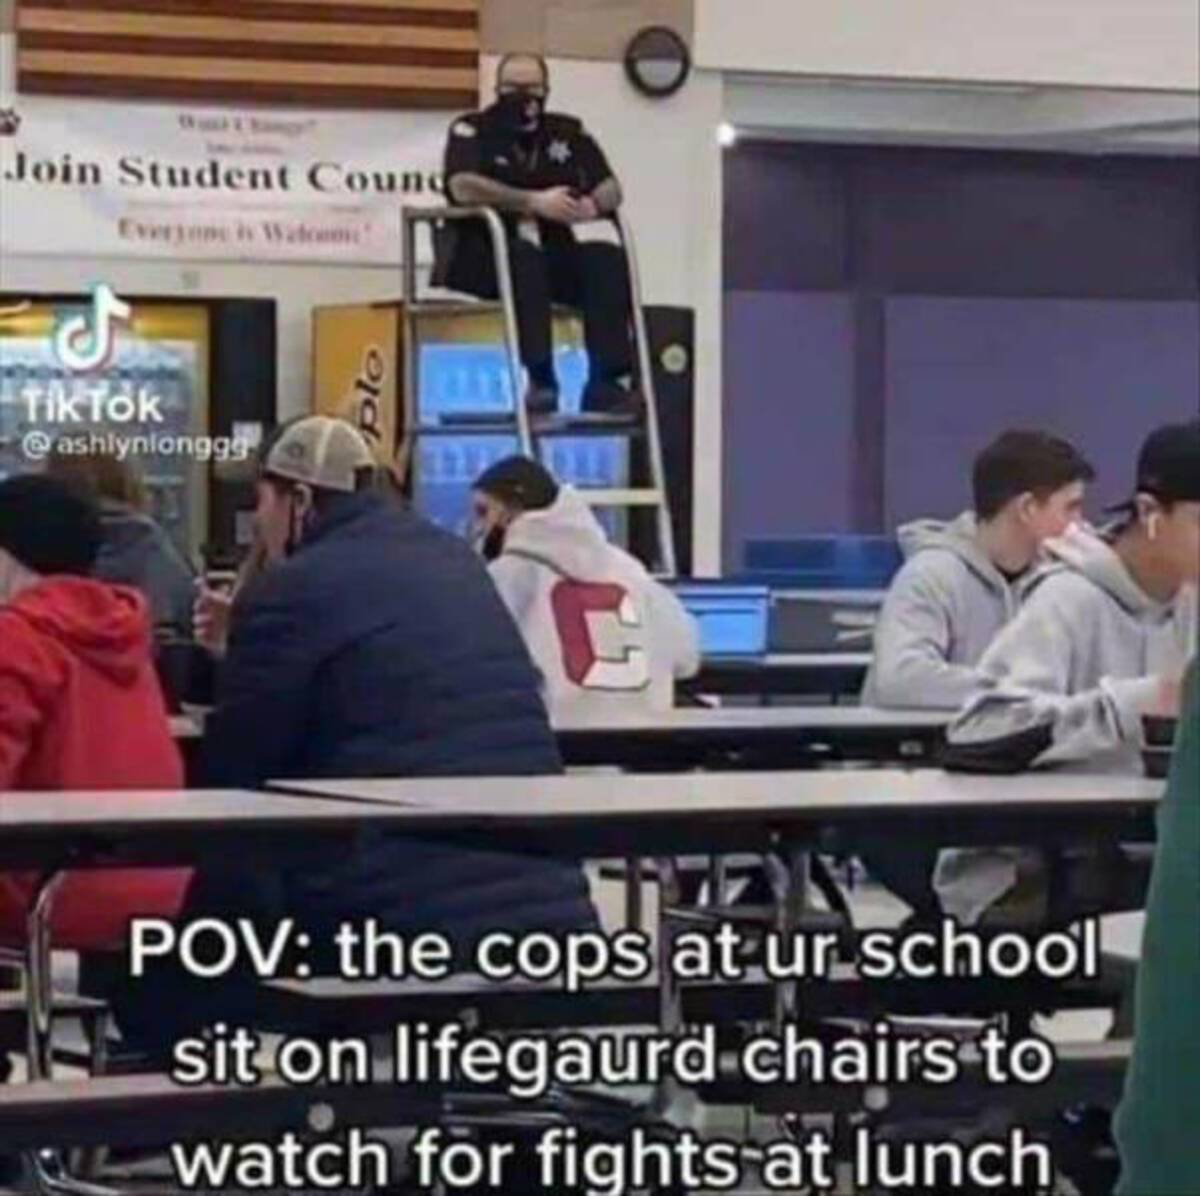 photo caption - Join Student Counc Everyone is Watom Tiktok ashlynlongg plo Pov the cops at ur school sit on lifegaurd chairs to watch for fights at lunch